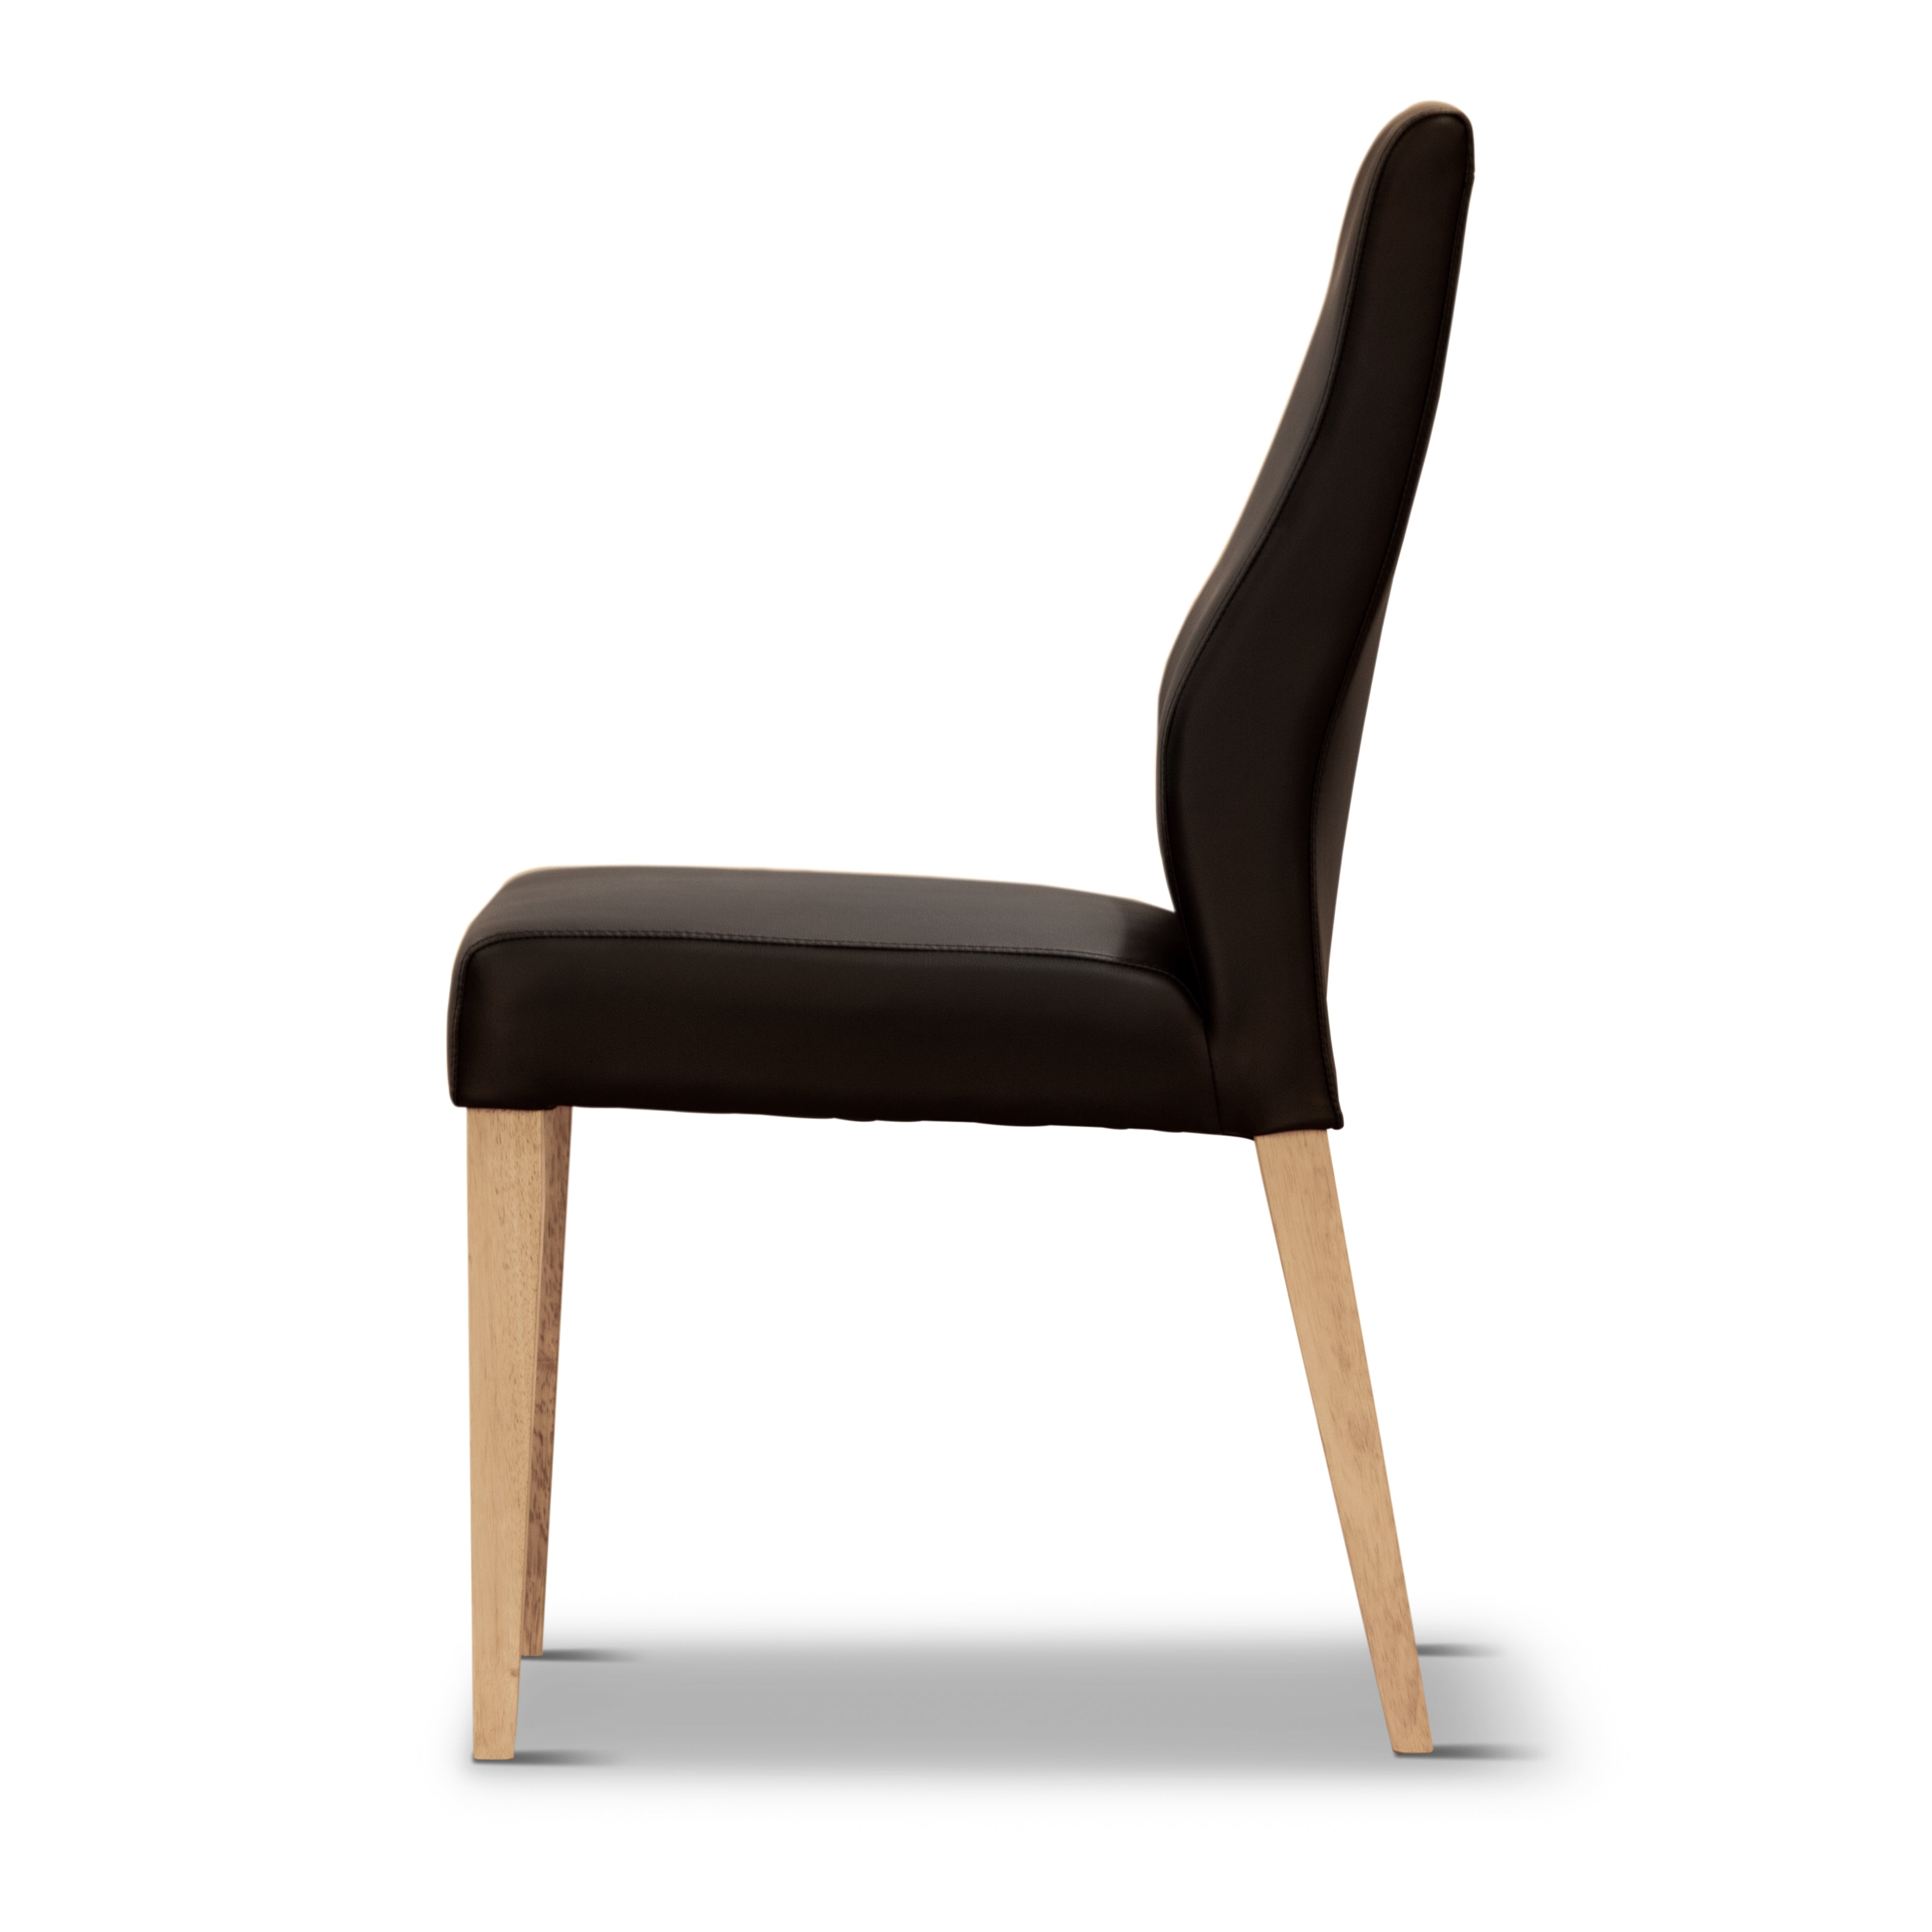 Elegant Dining Chair Set: PU Leather Seat, Solid Messmate Timber - Black